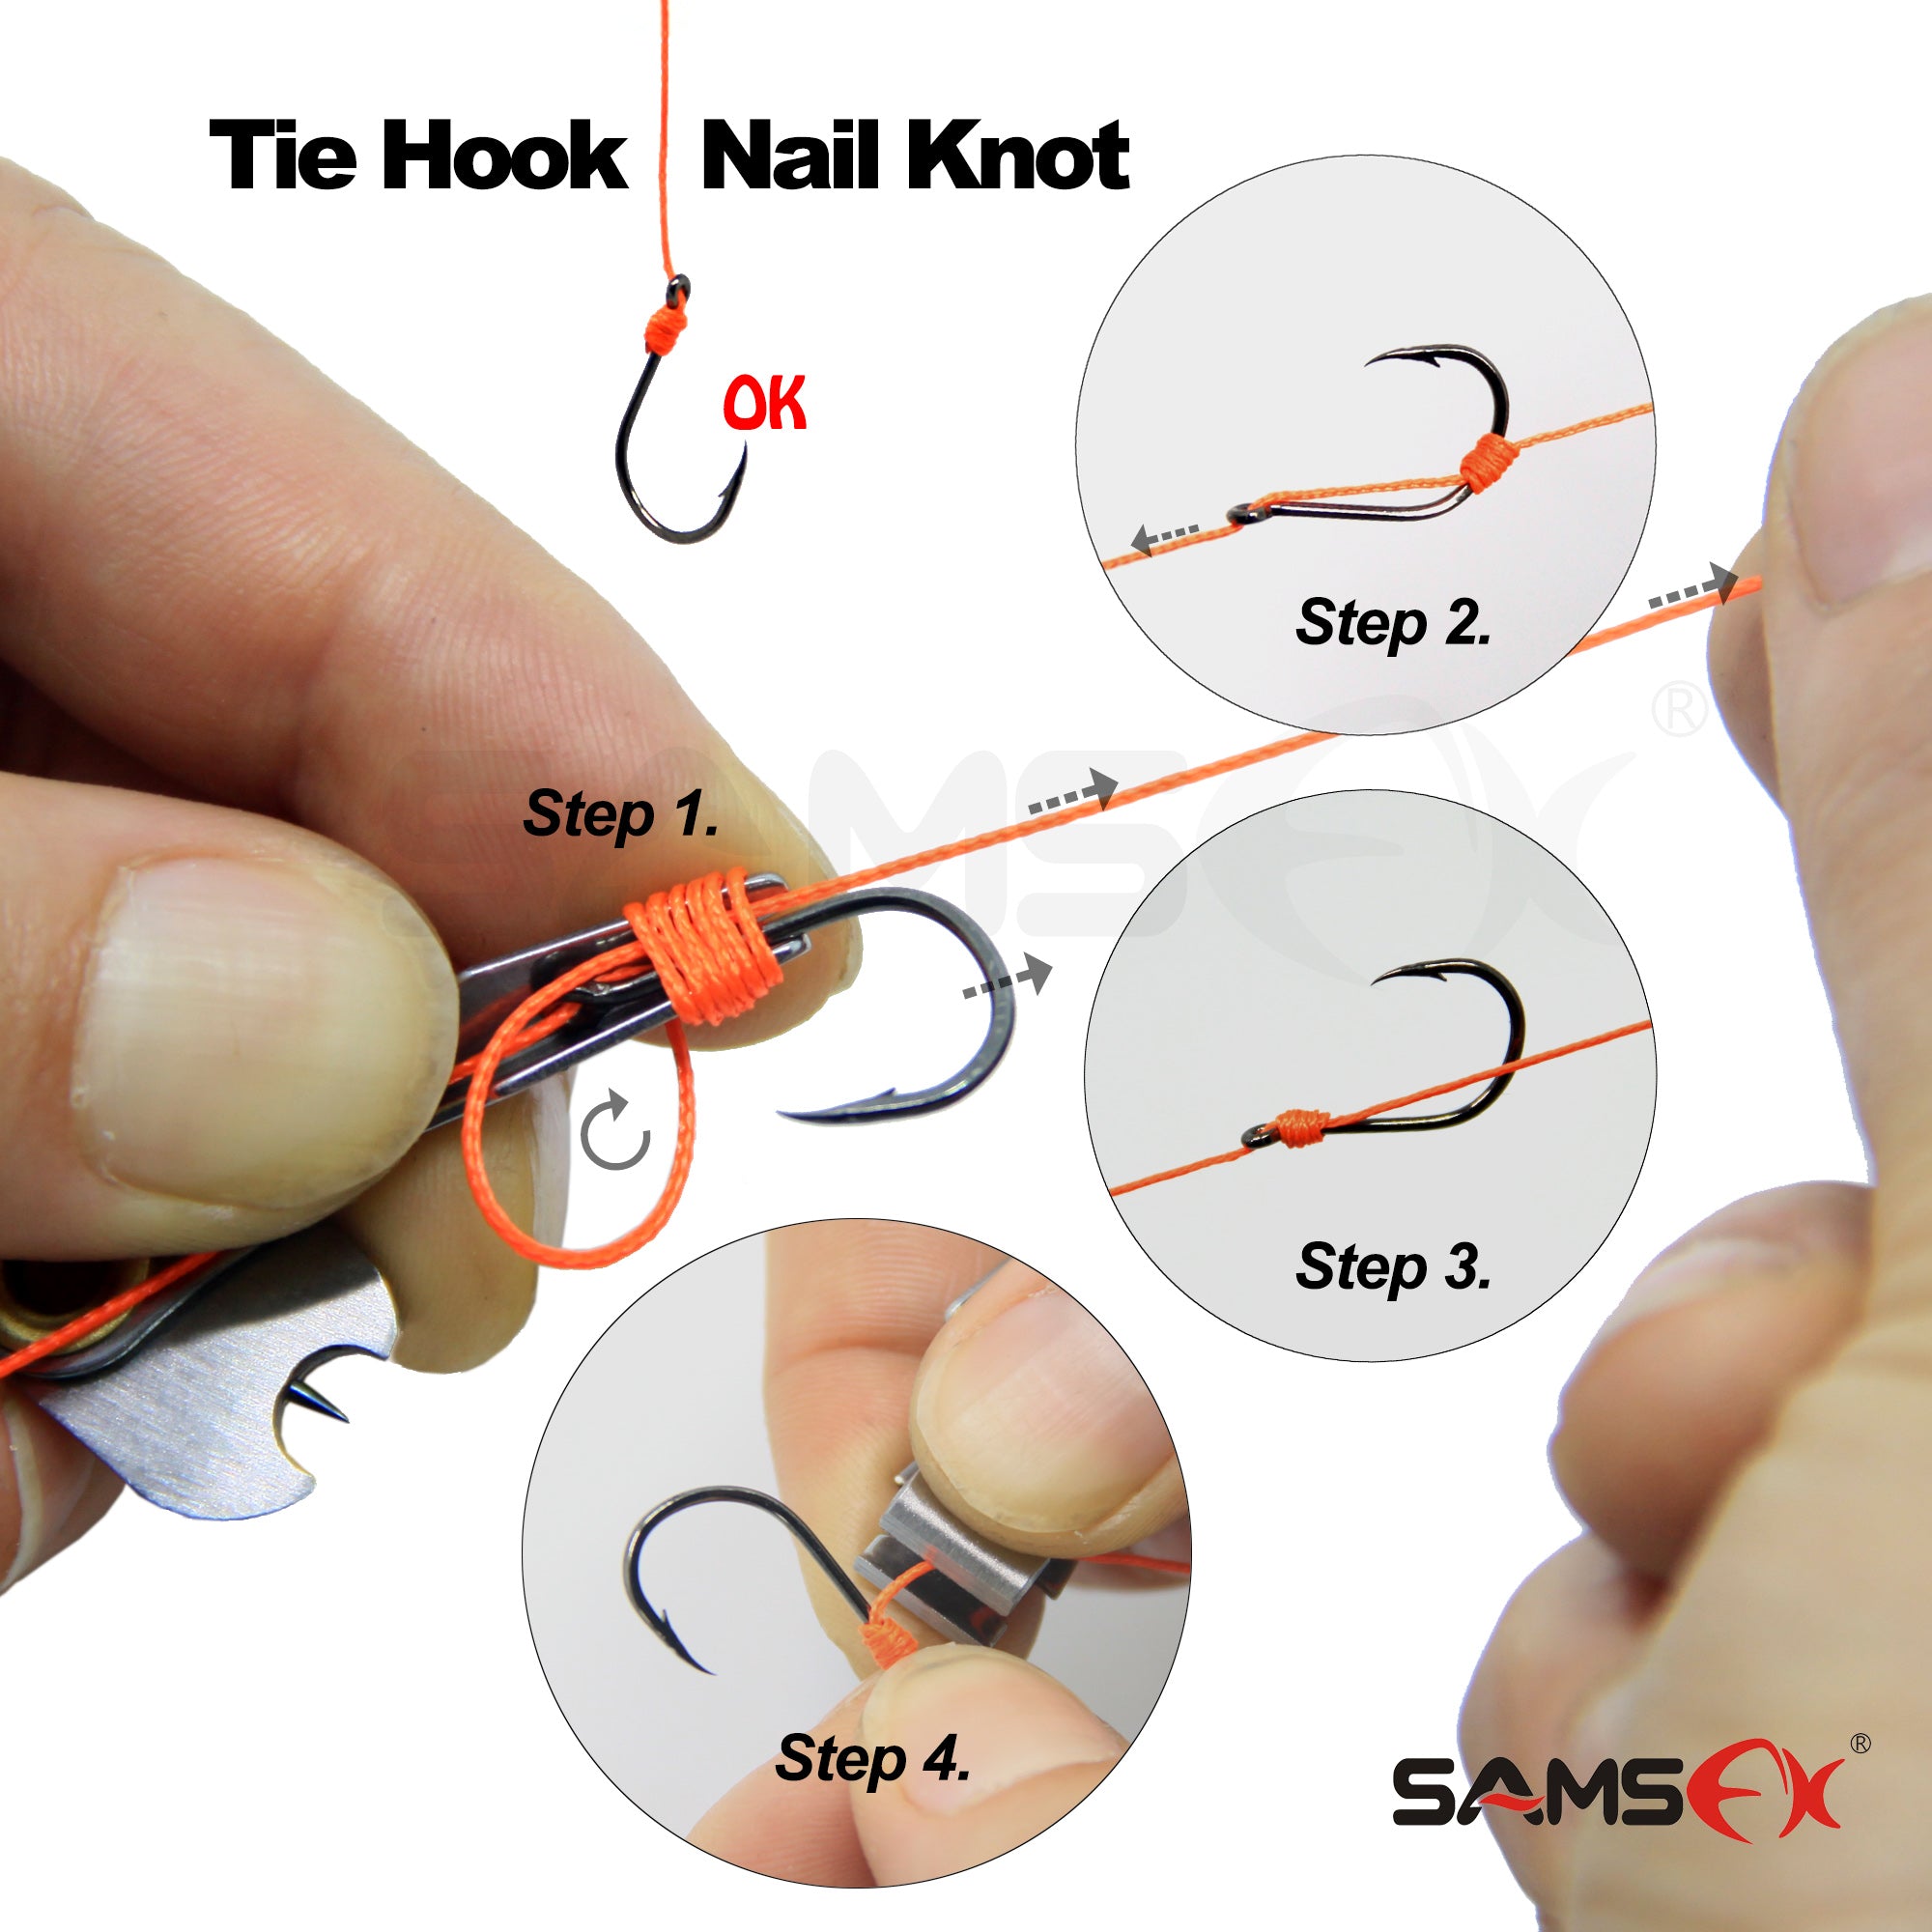 How to tie a Snell Knot using the Hook-Eze knot tying tool